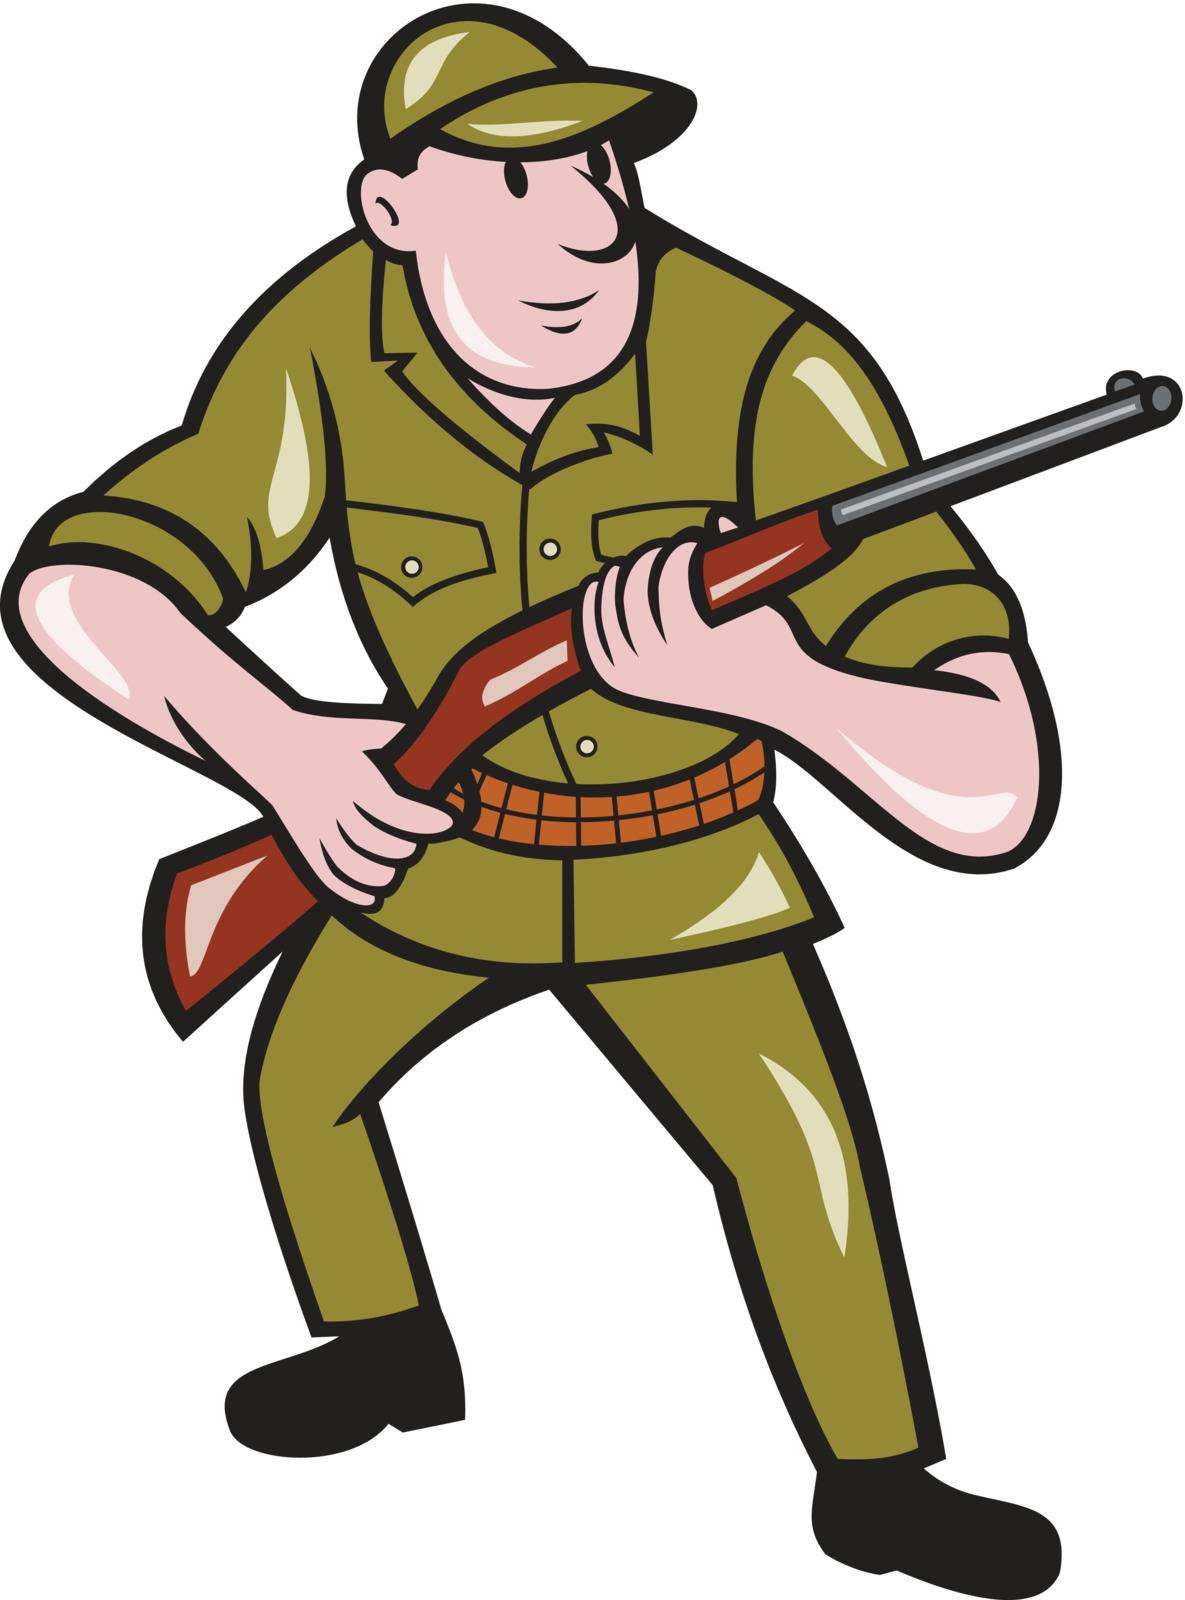 Illustration of a hunter carrying rifle facing front on isolated background done in cartoon style.